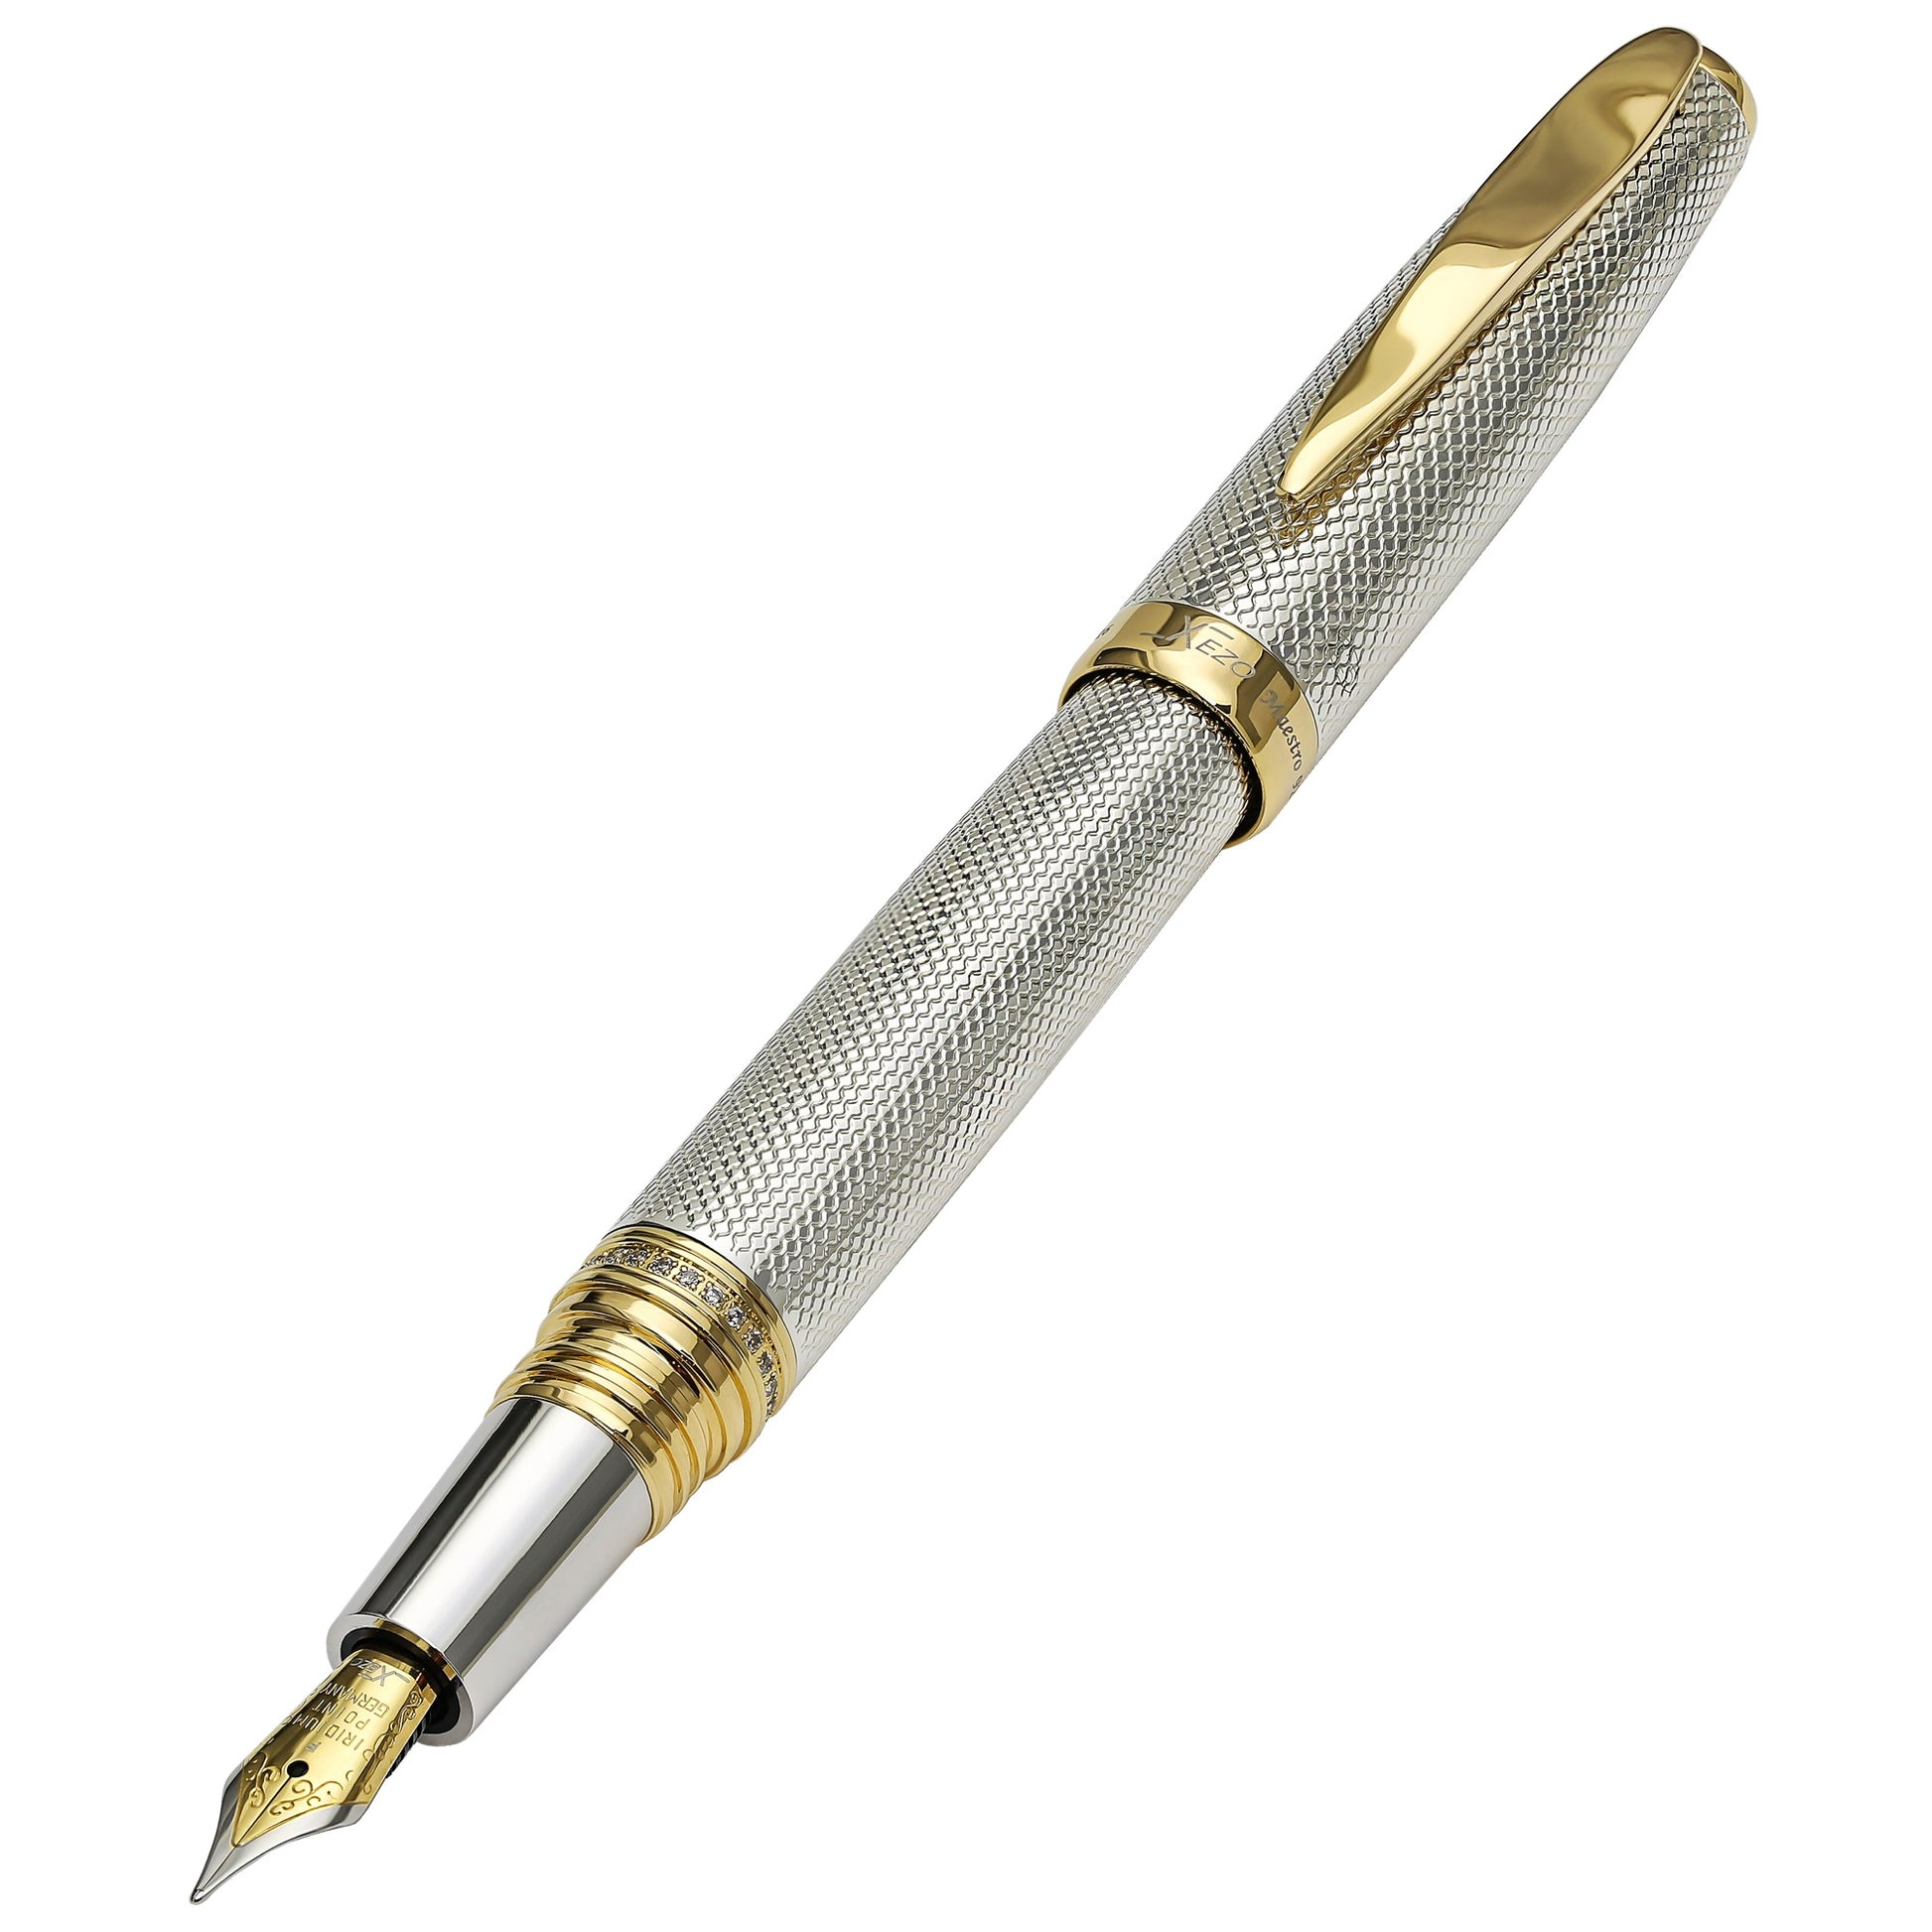 Xezo - Angled view of the front of the Maestro 925 Sterling Silver F-1 fountain pen